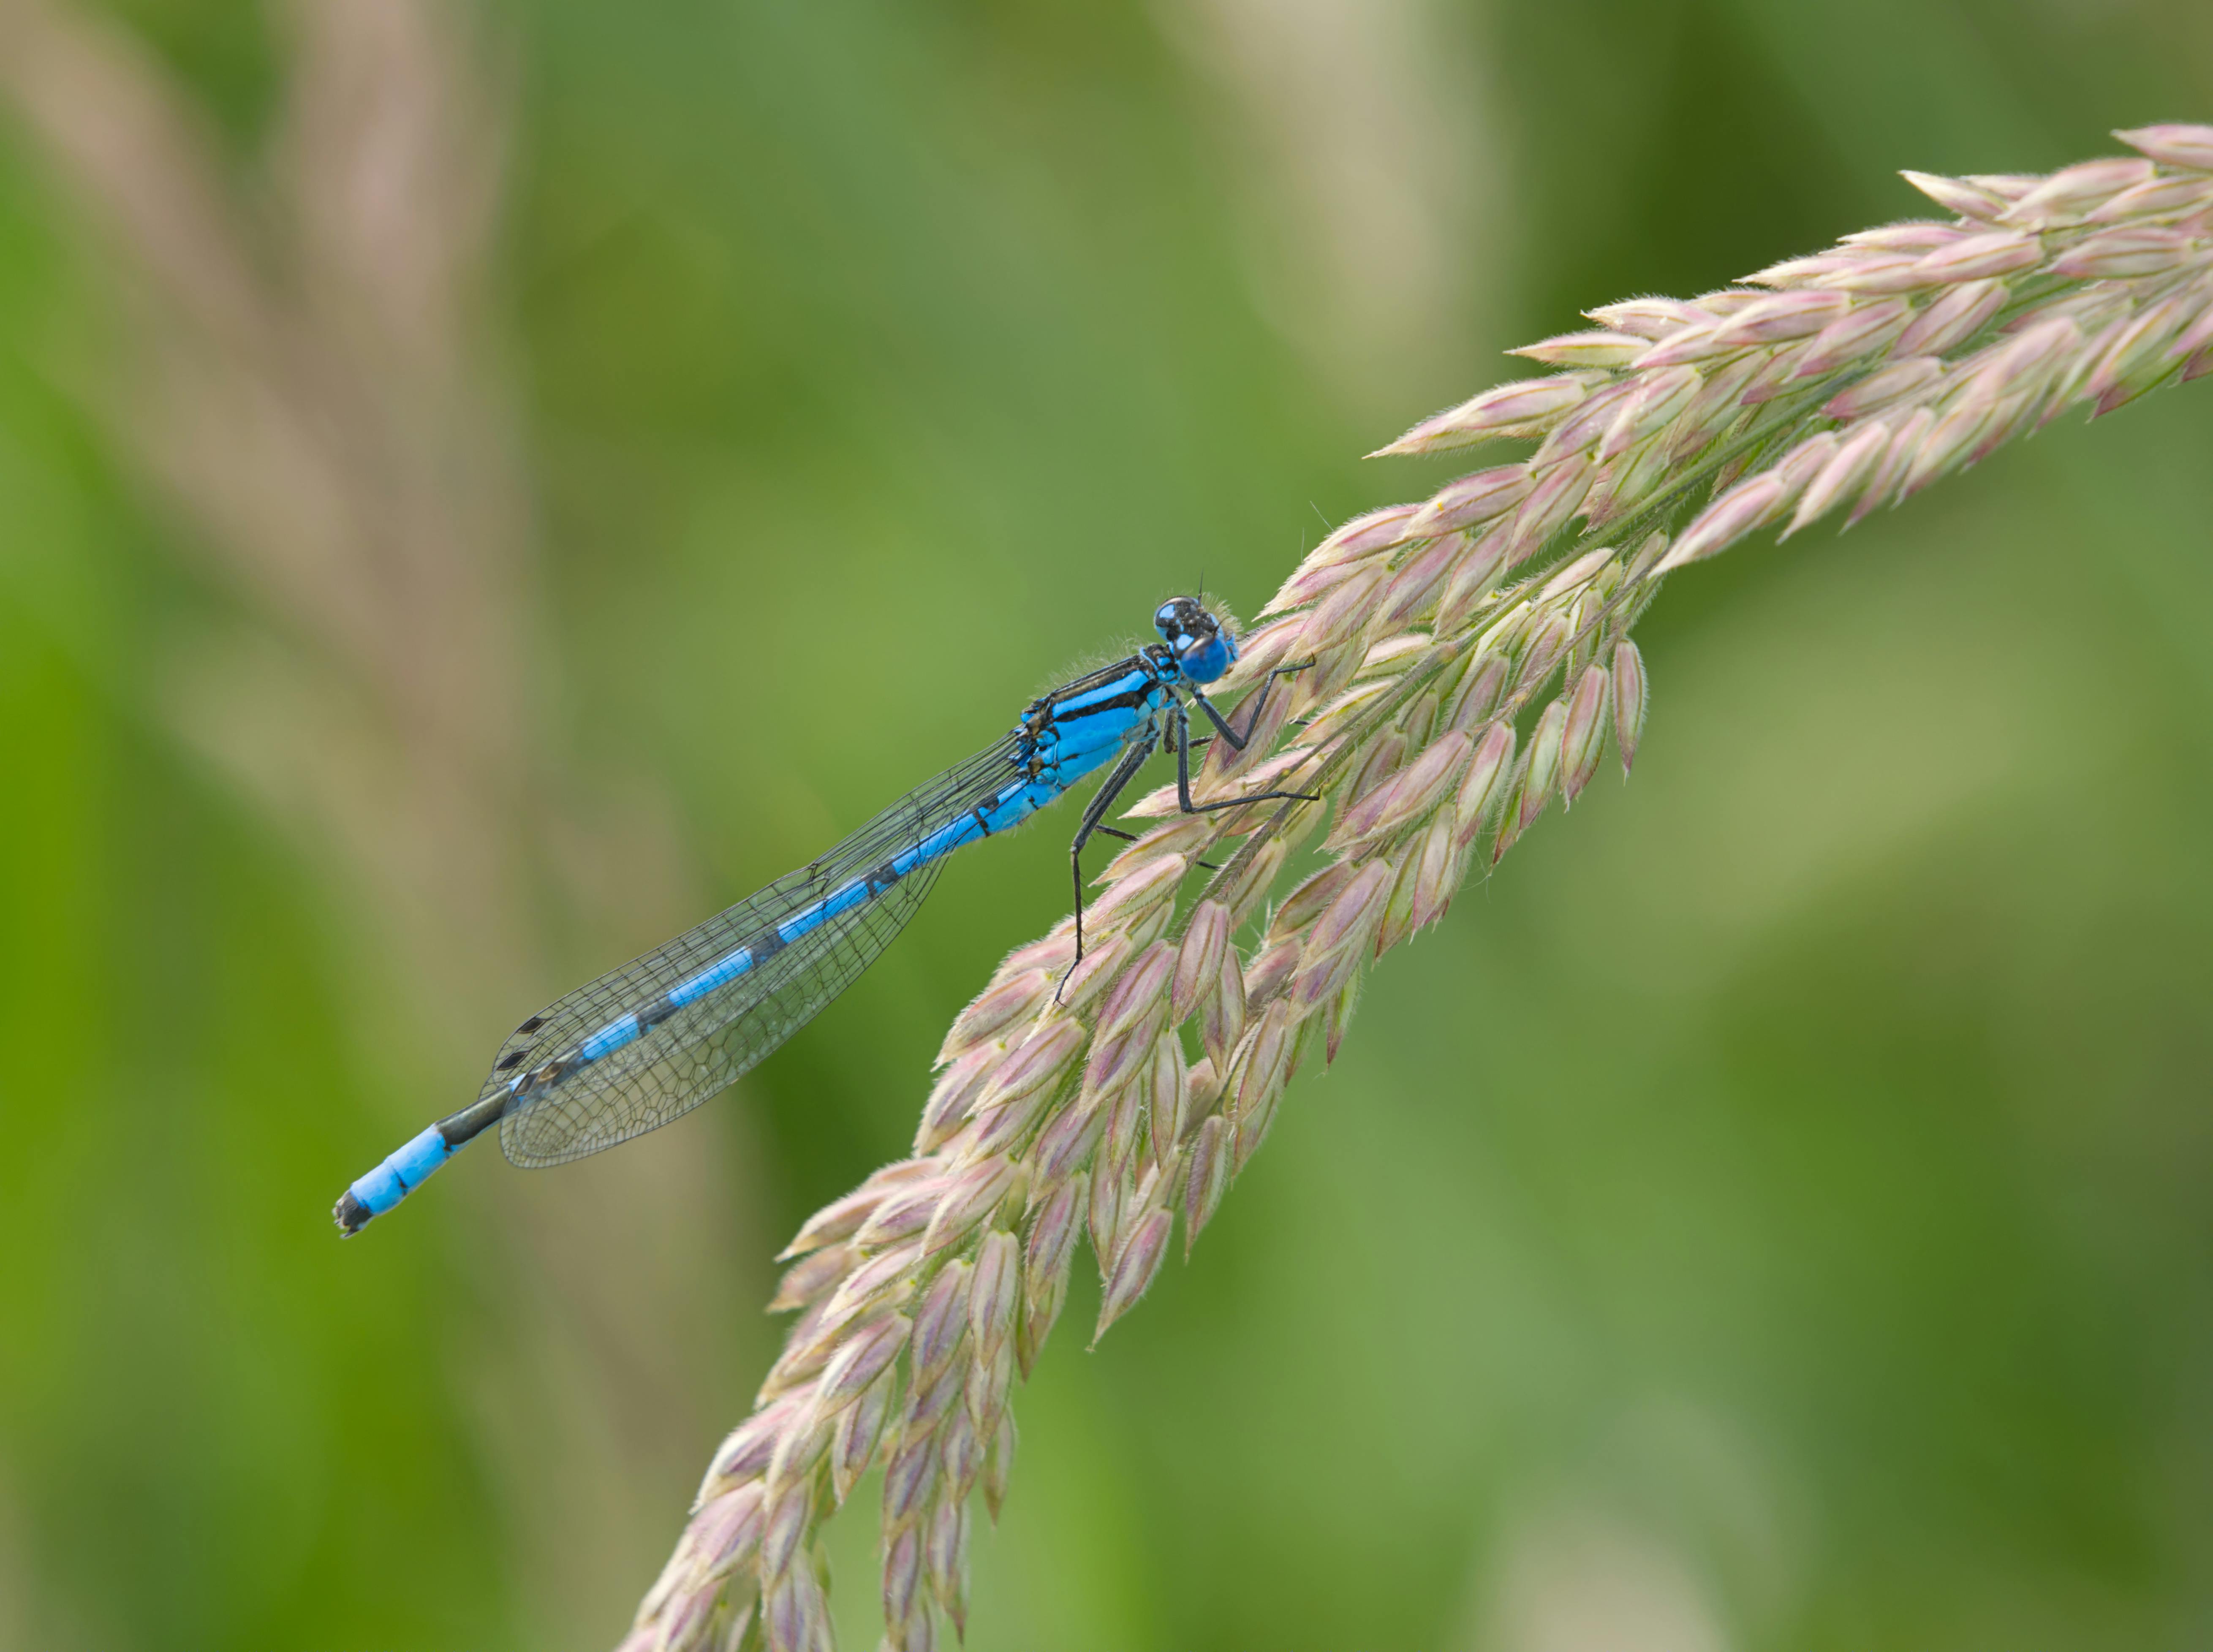 Green and Brown Dragon Fly on Wheat Plant · Free Stock Photo